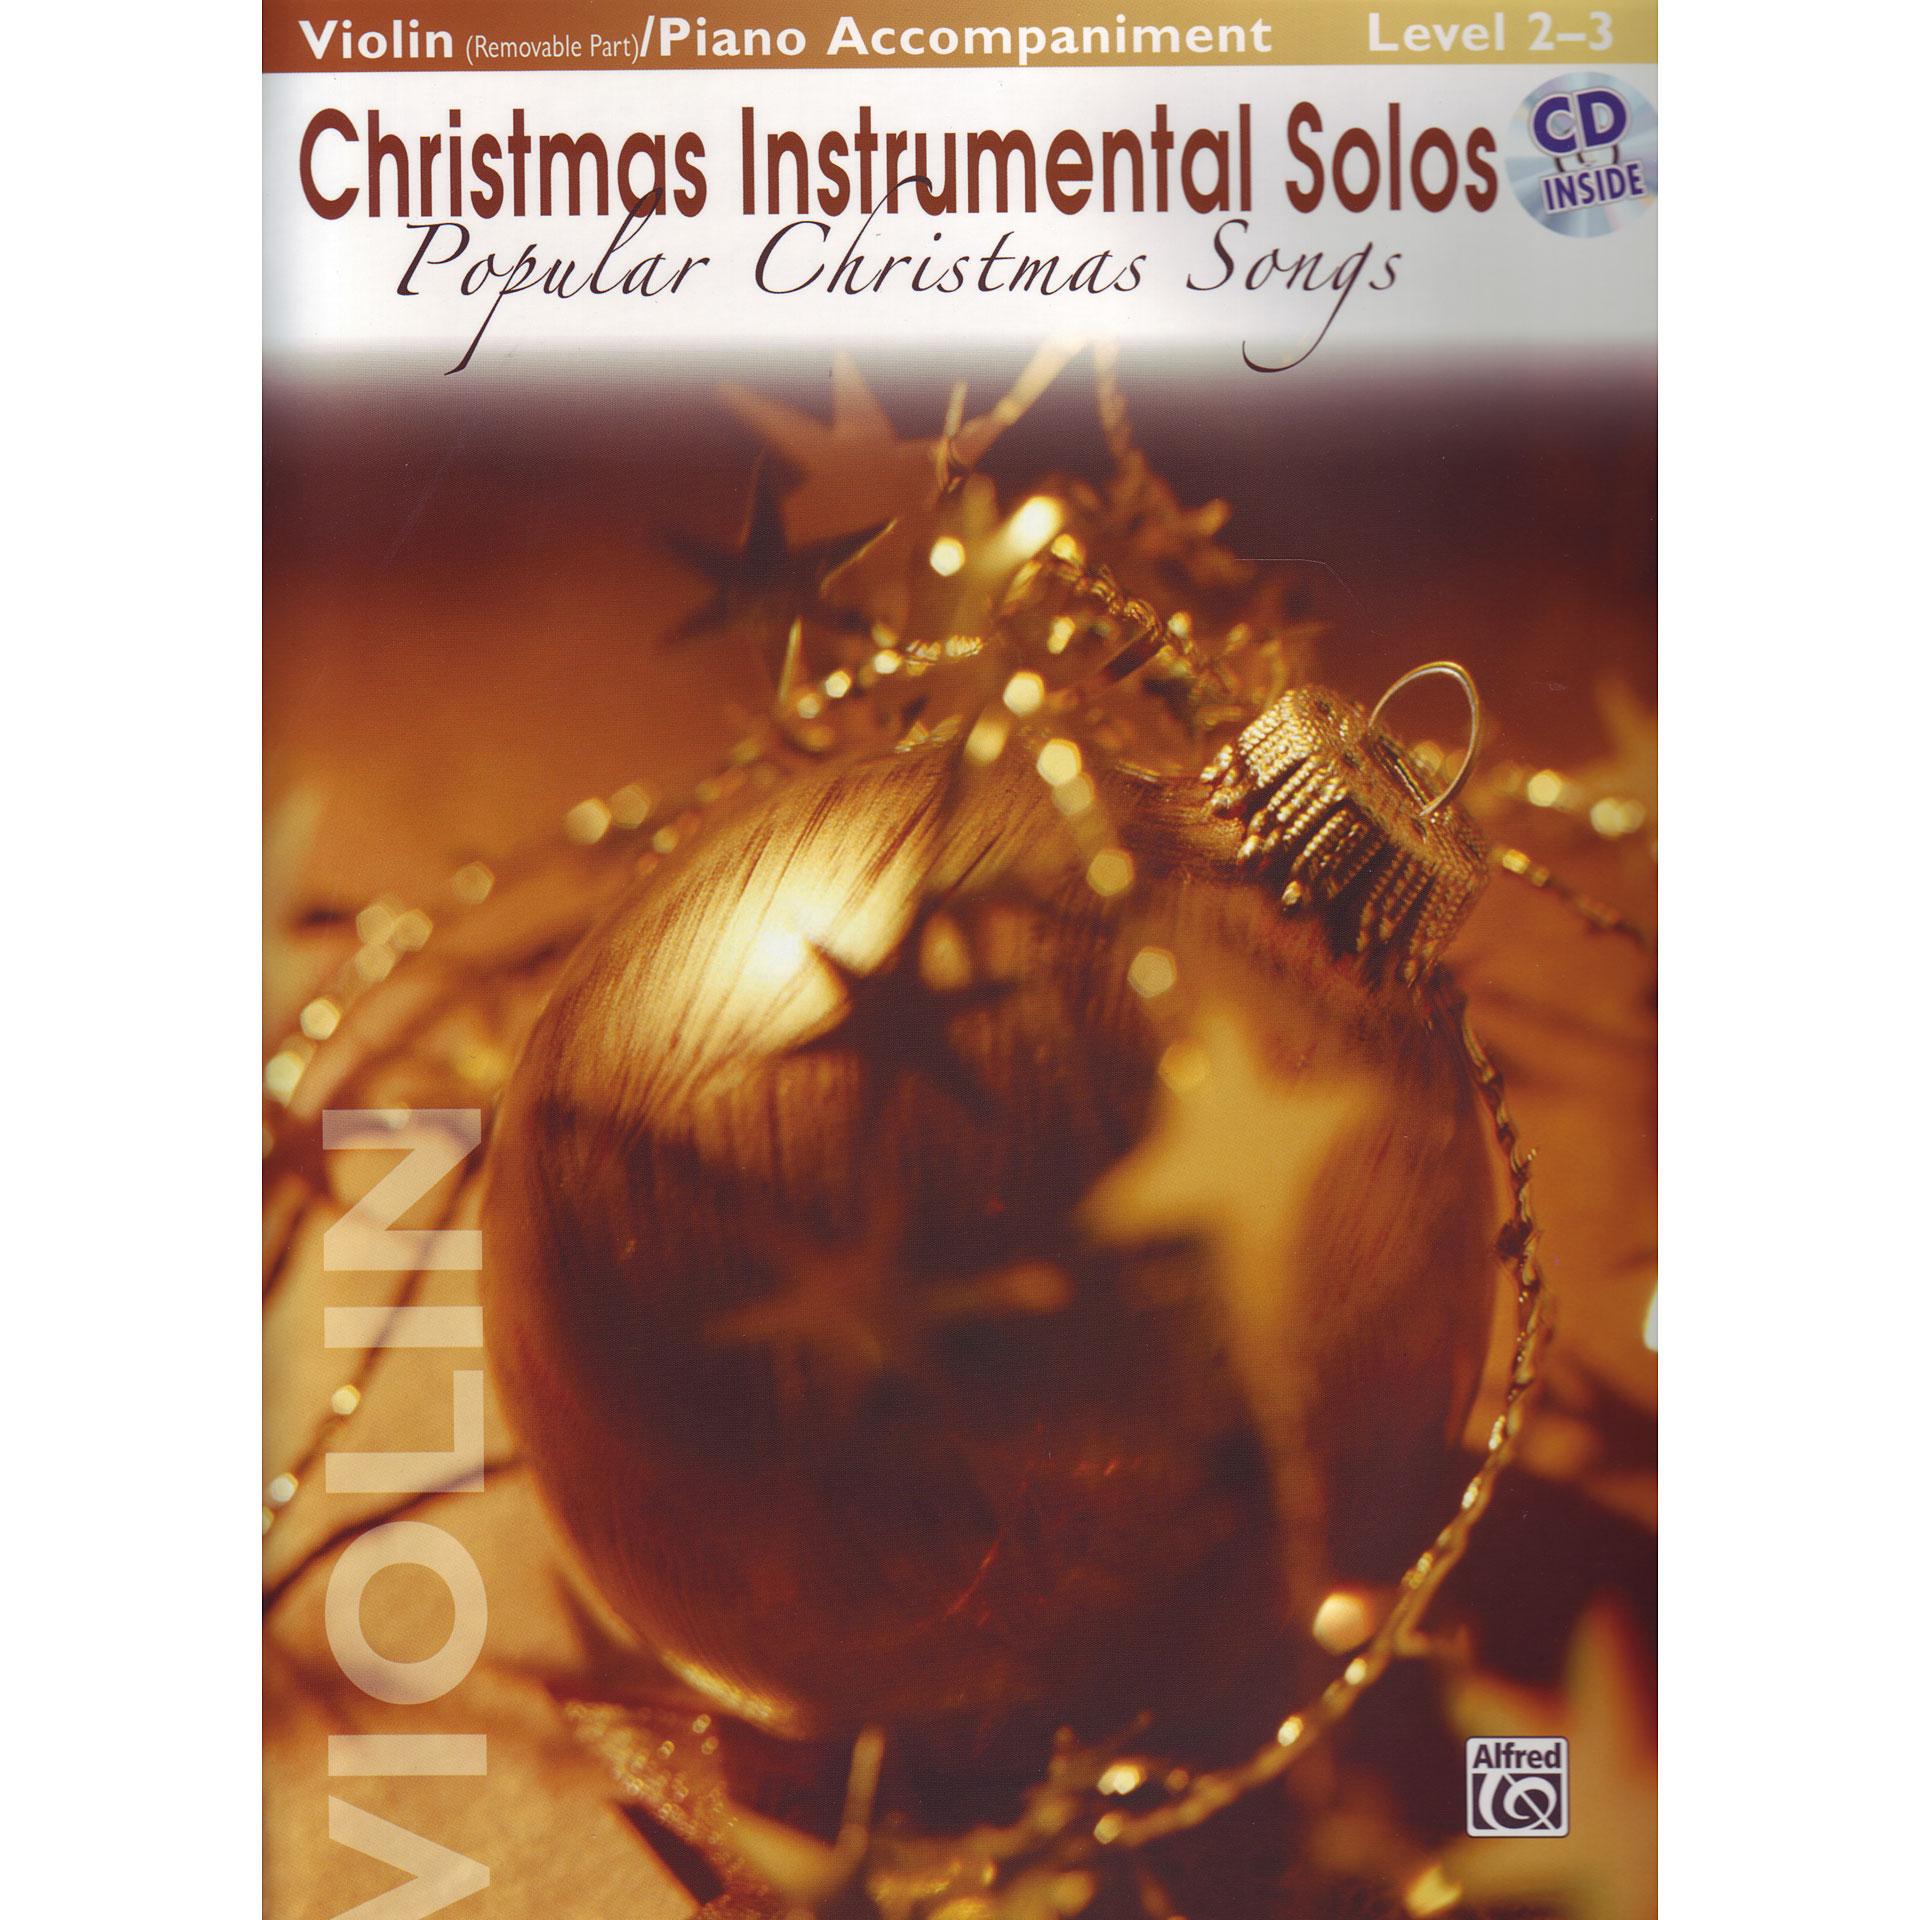 Foto Alfred KDM Christmas Instrumental Solos, Play-Along